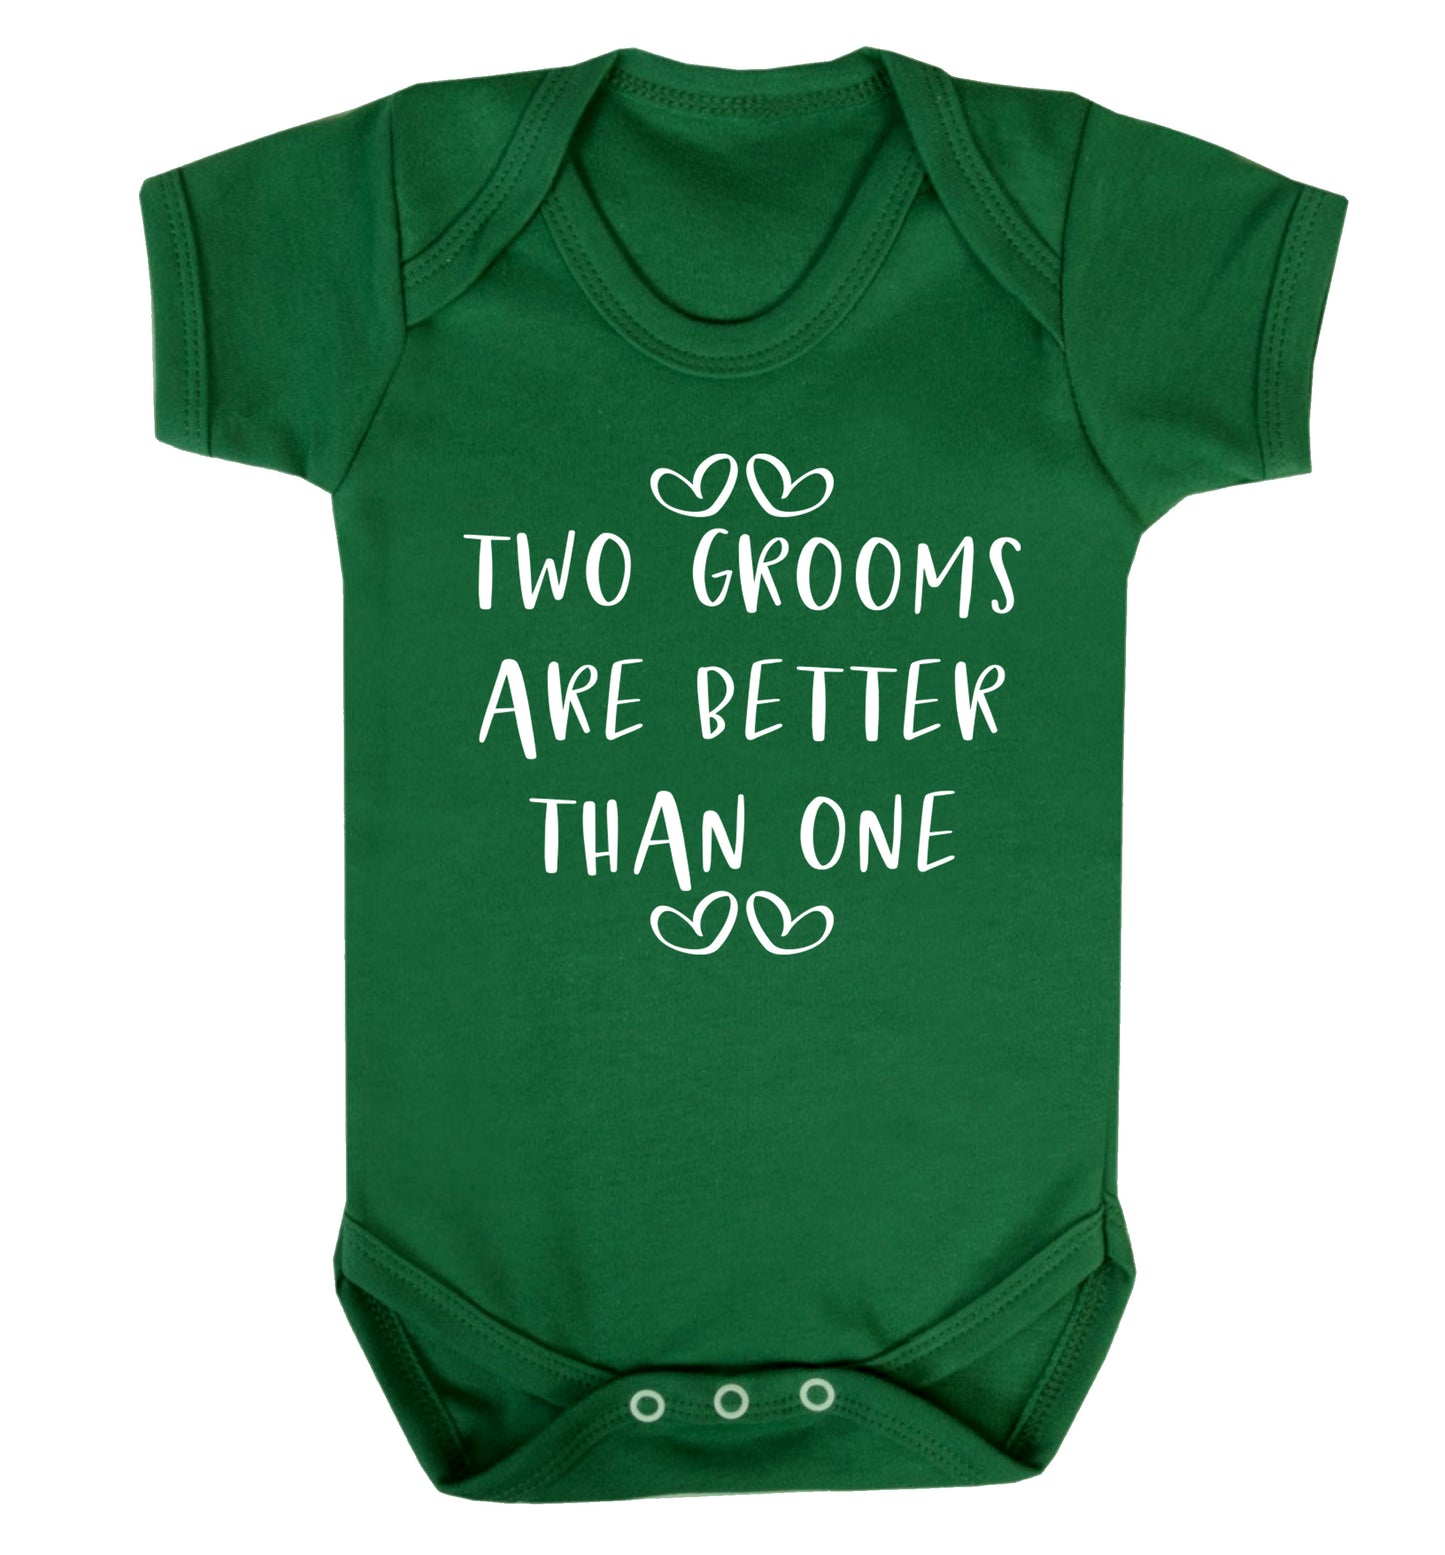 Two grooms are better than one baby vest green 18-24 months